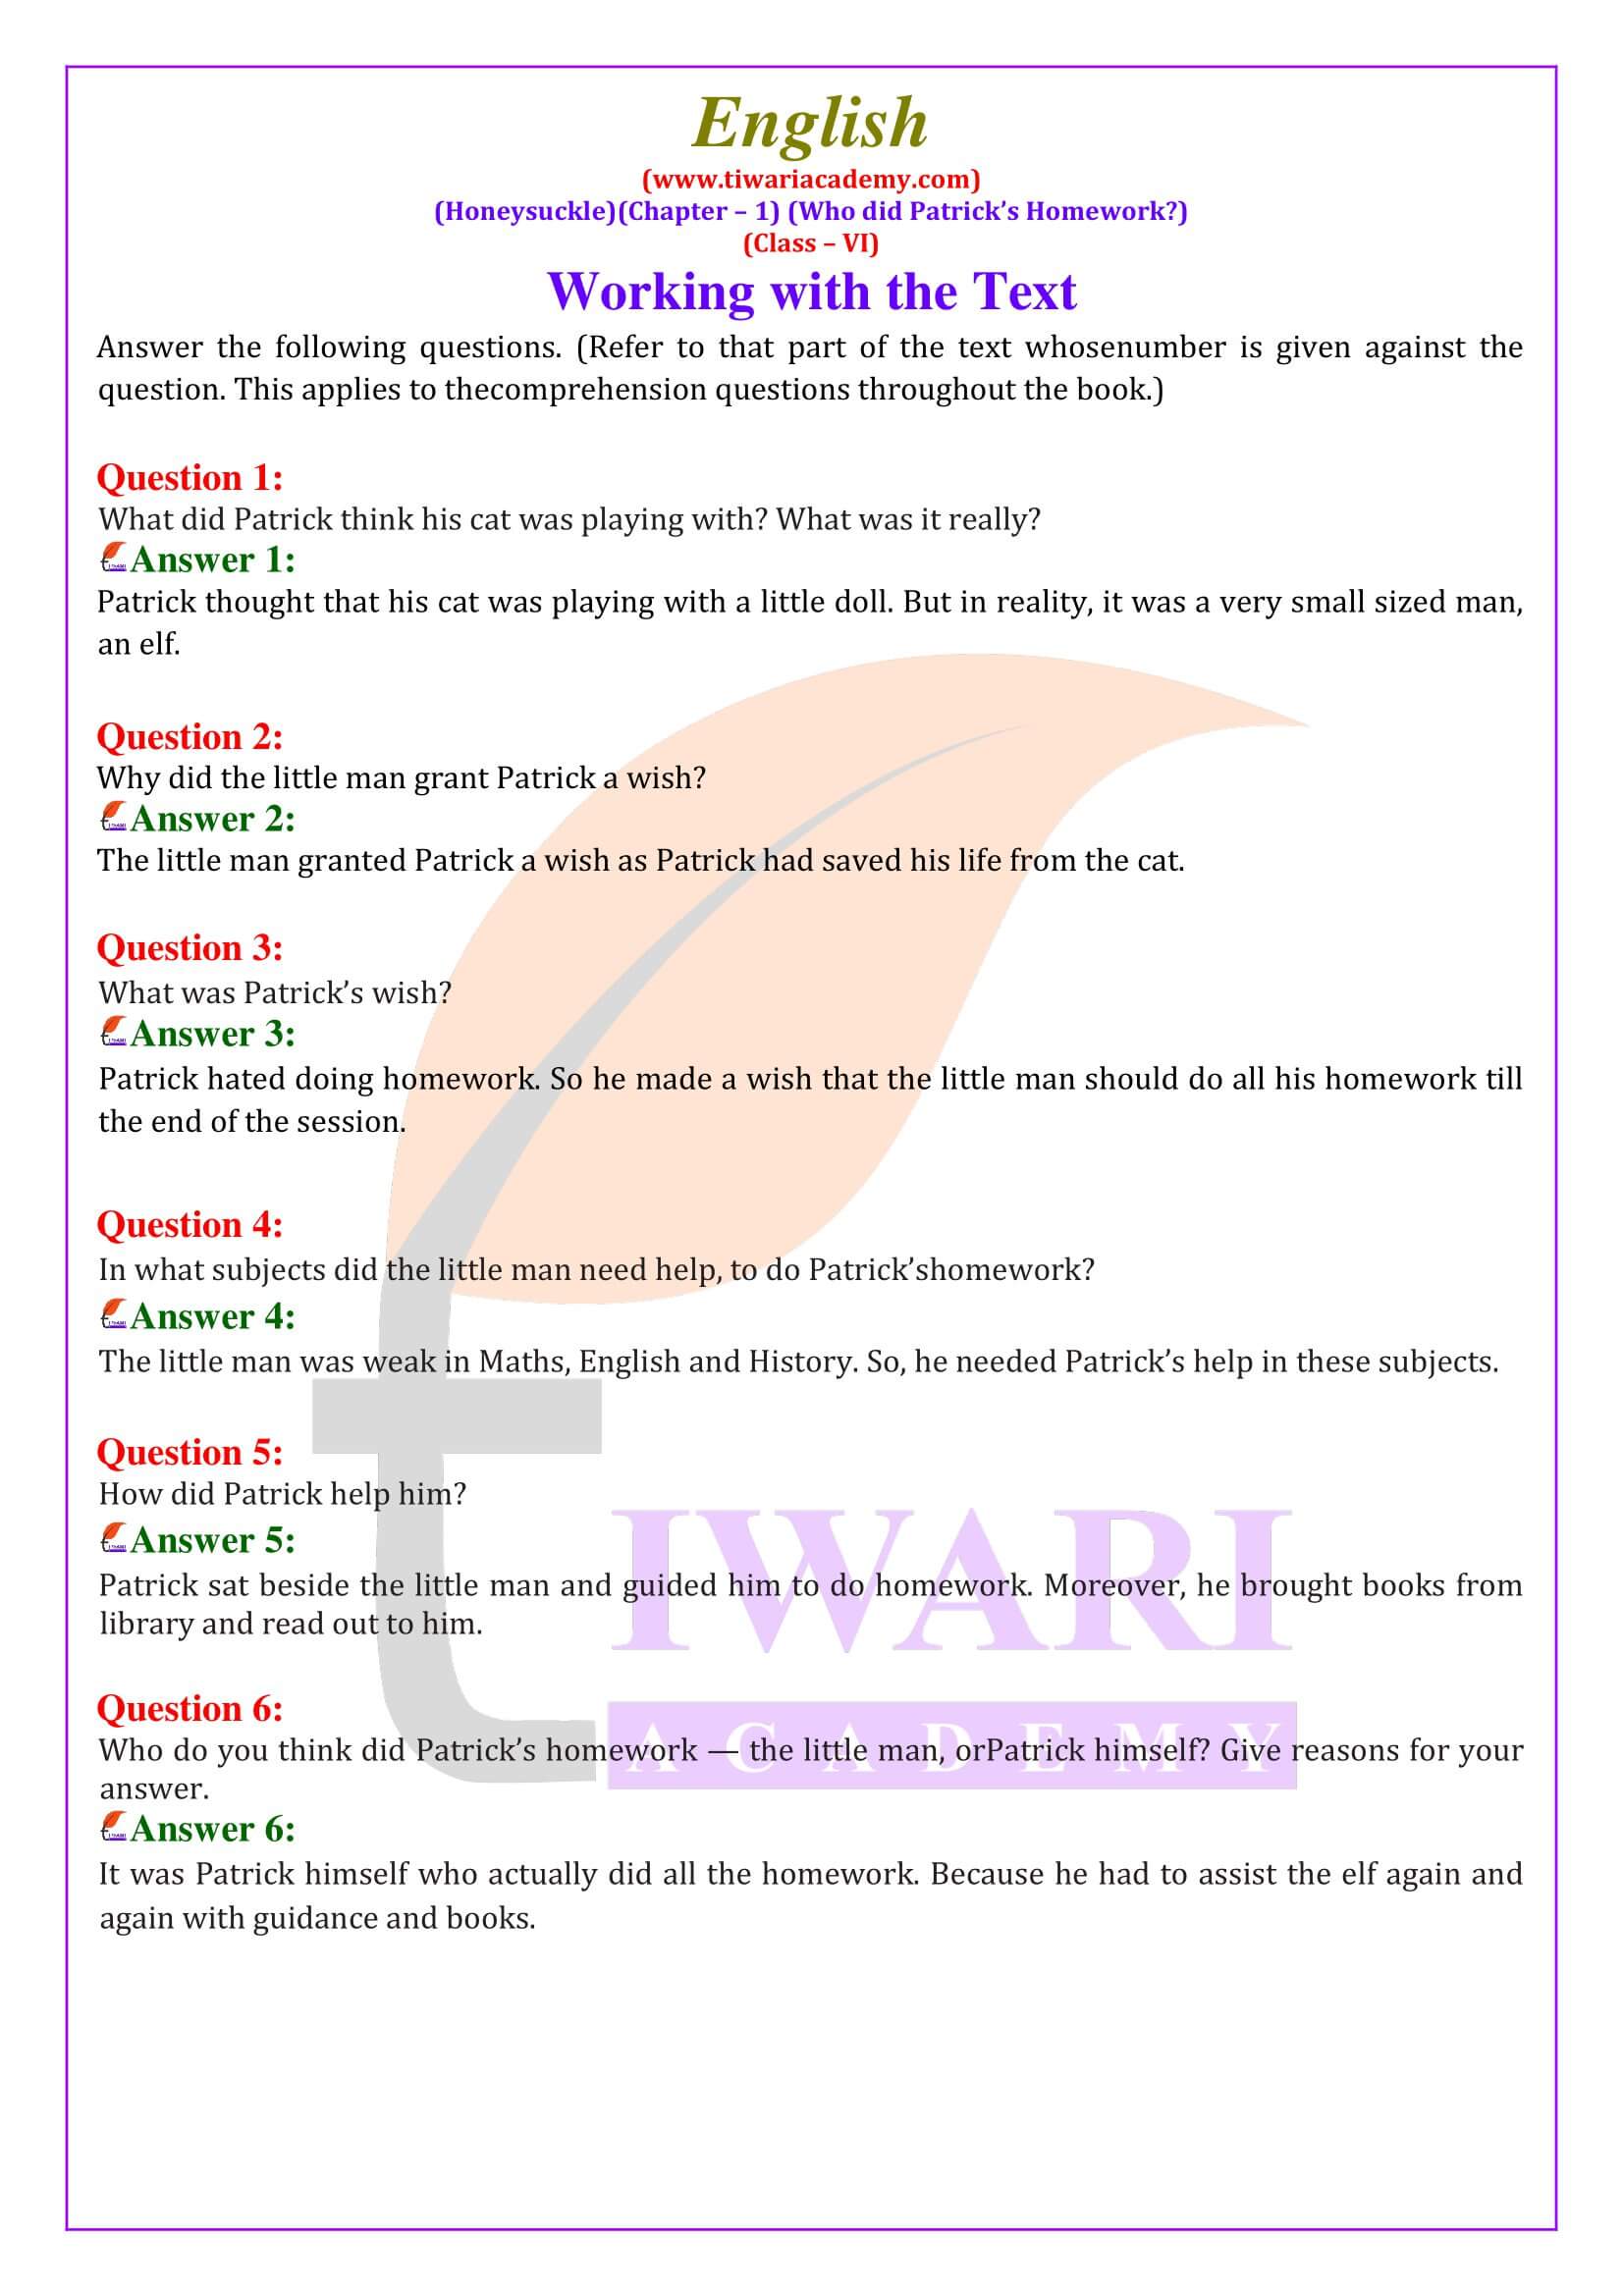 Class 6 English Chapter 1 Worksheet Answers